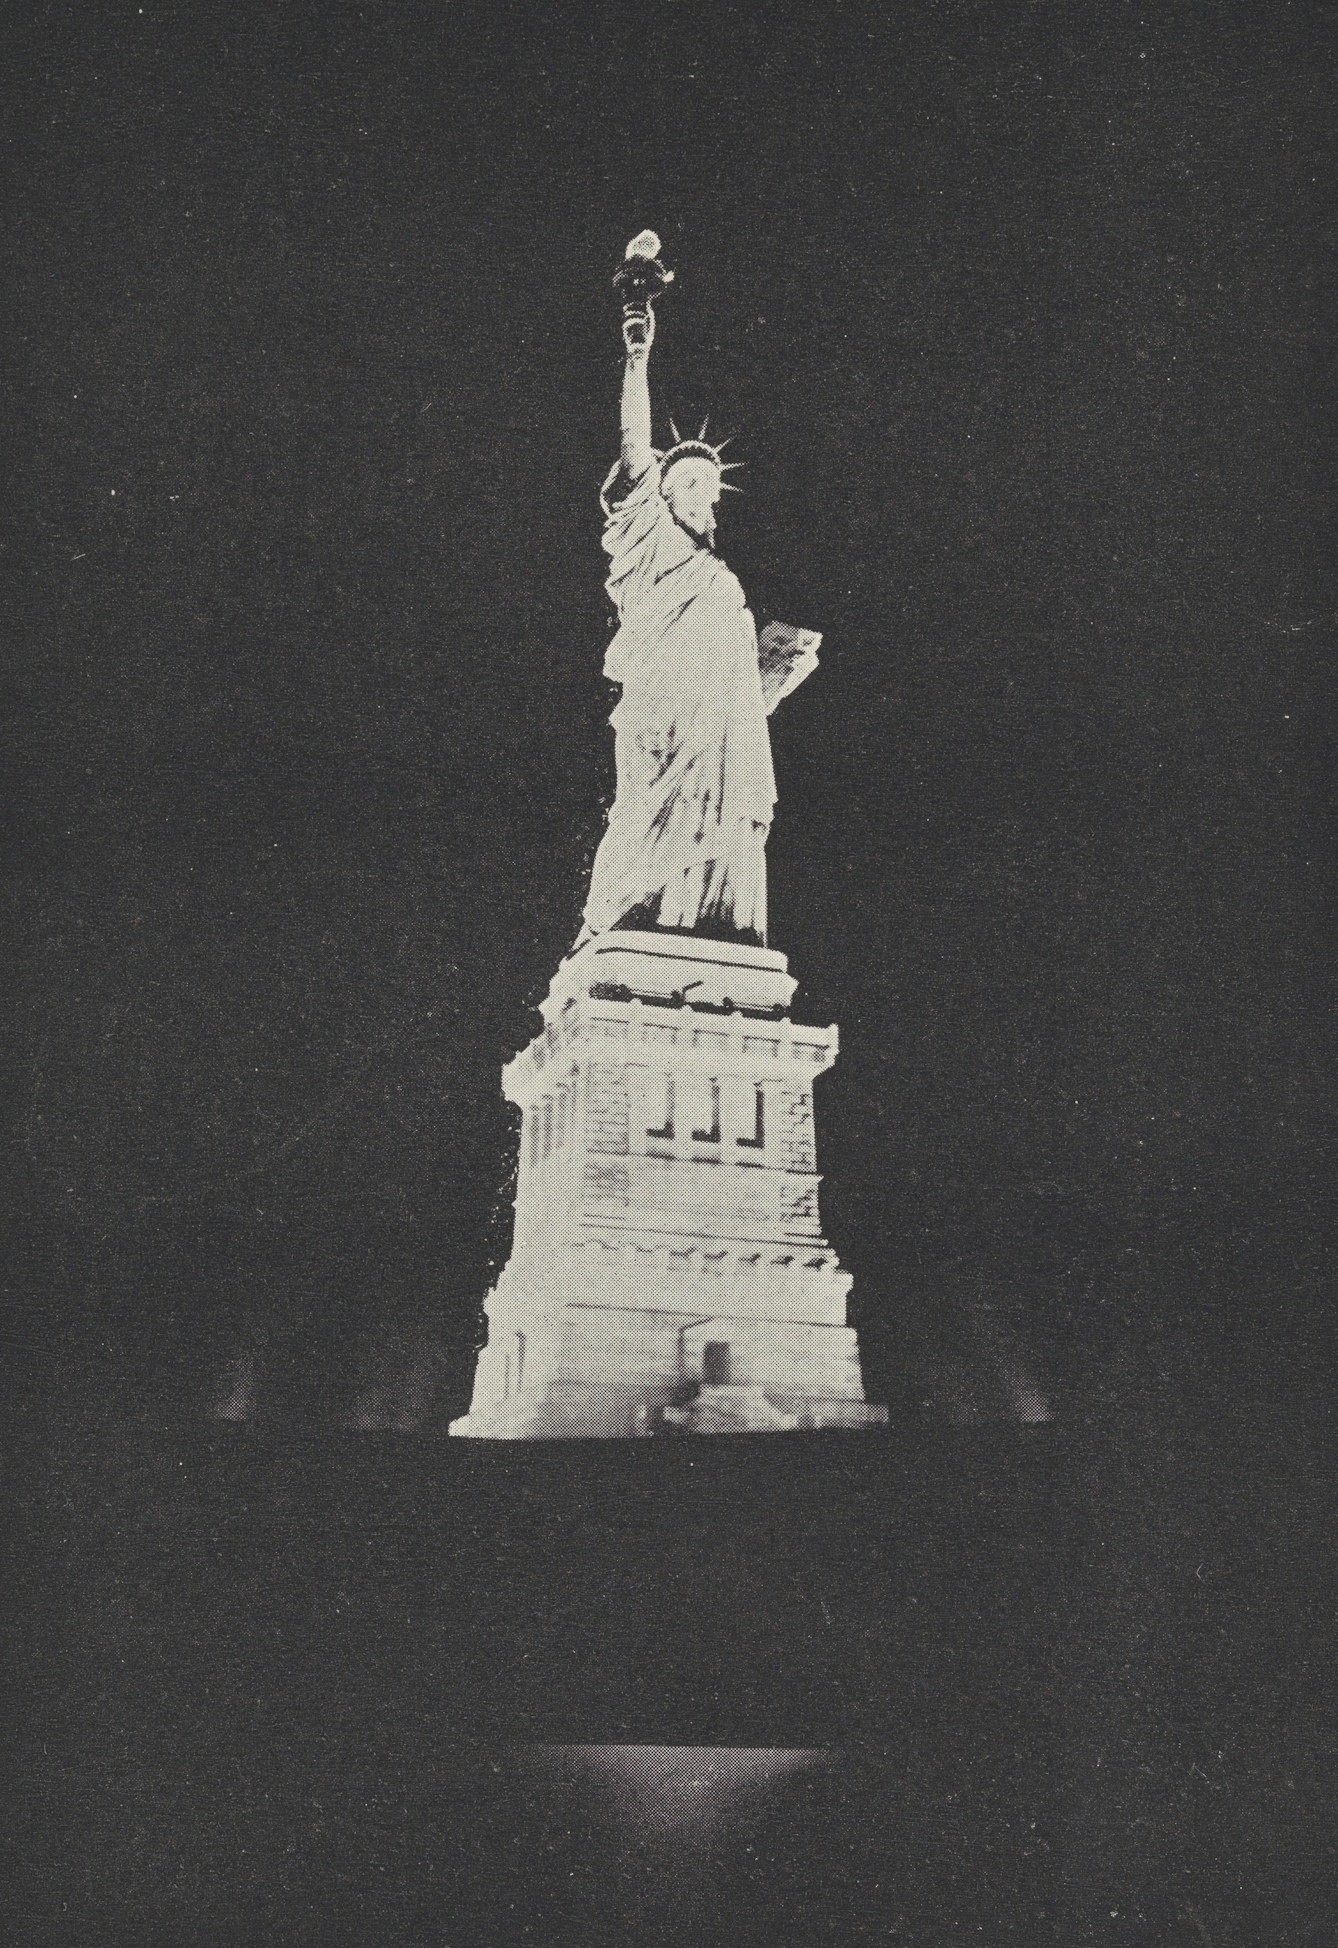 In 1886 the Statue of Liberty was illuminated, further enhancing its symbolic values of progress and enlightenment.